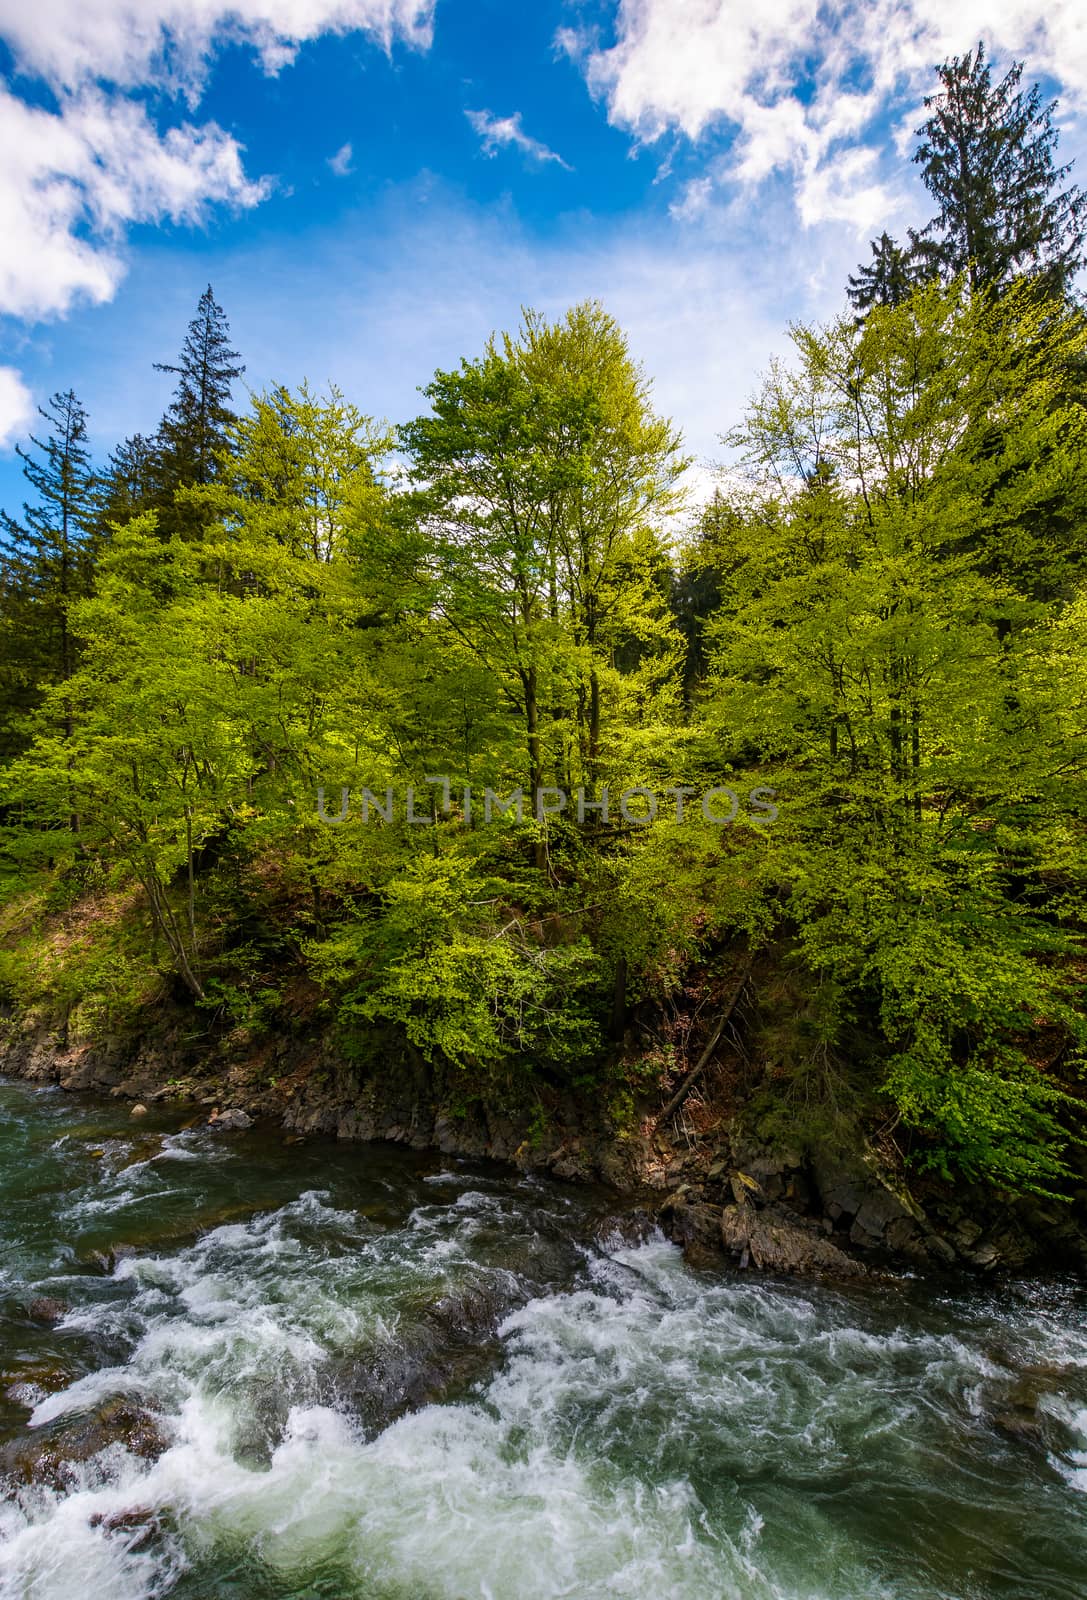 powerful mountain river and forest on a cliff by Pellinni